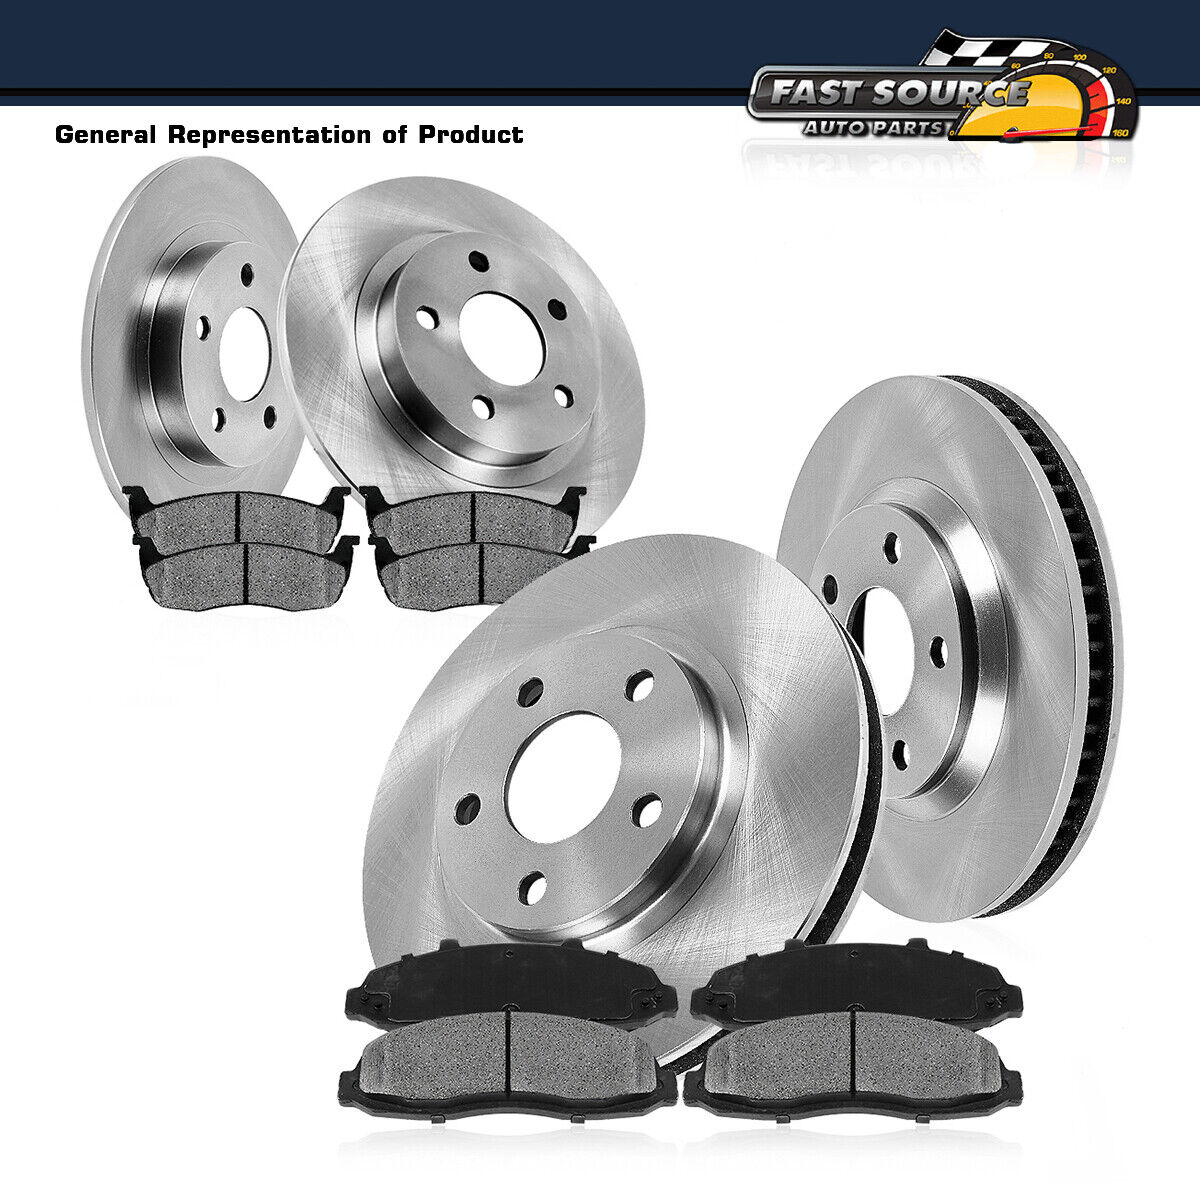 Front+Rear Rotors & Metallic Pads For 1999 2000 - 2005 Chevy Impala Monte Carlo